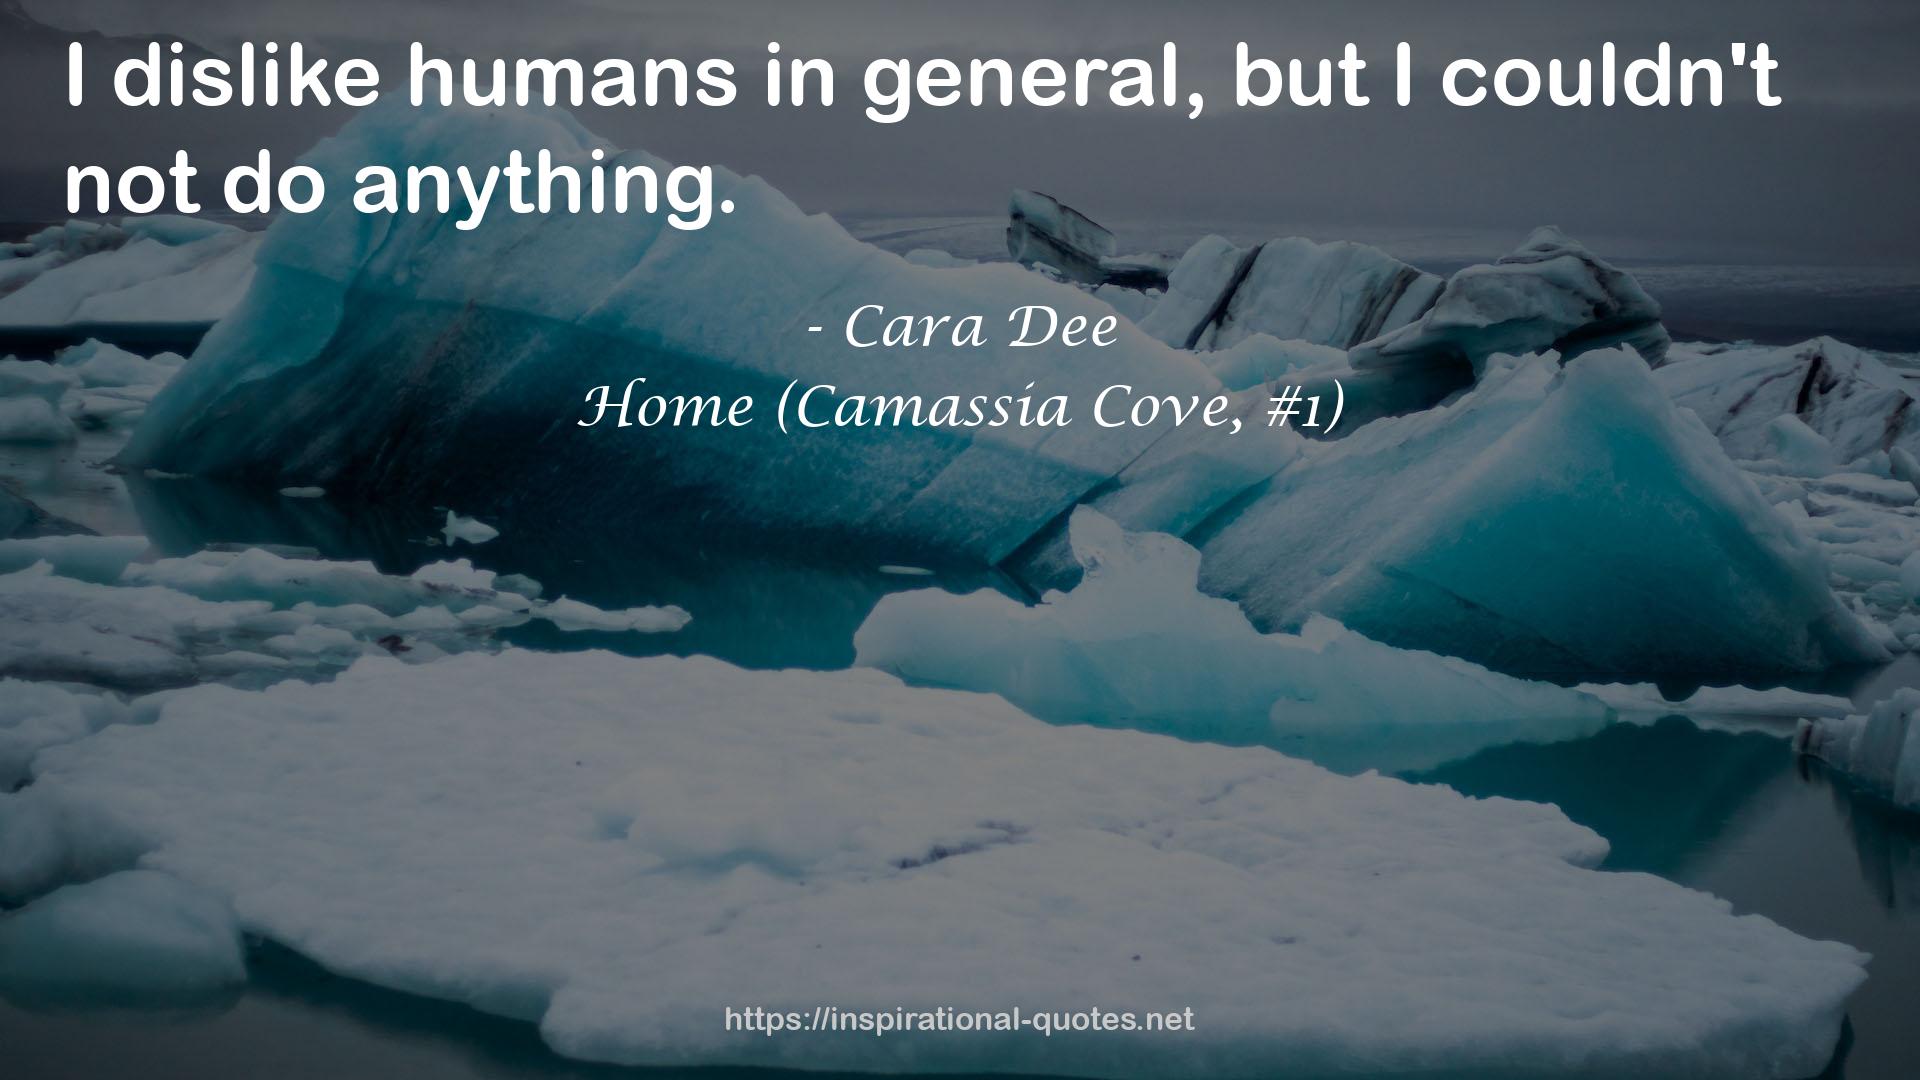 Home (Camassia Cove, #1) QUOTES